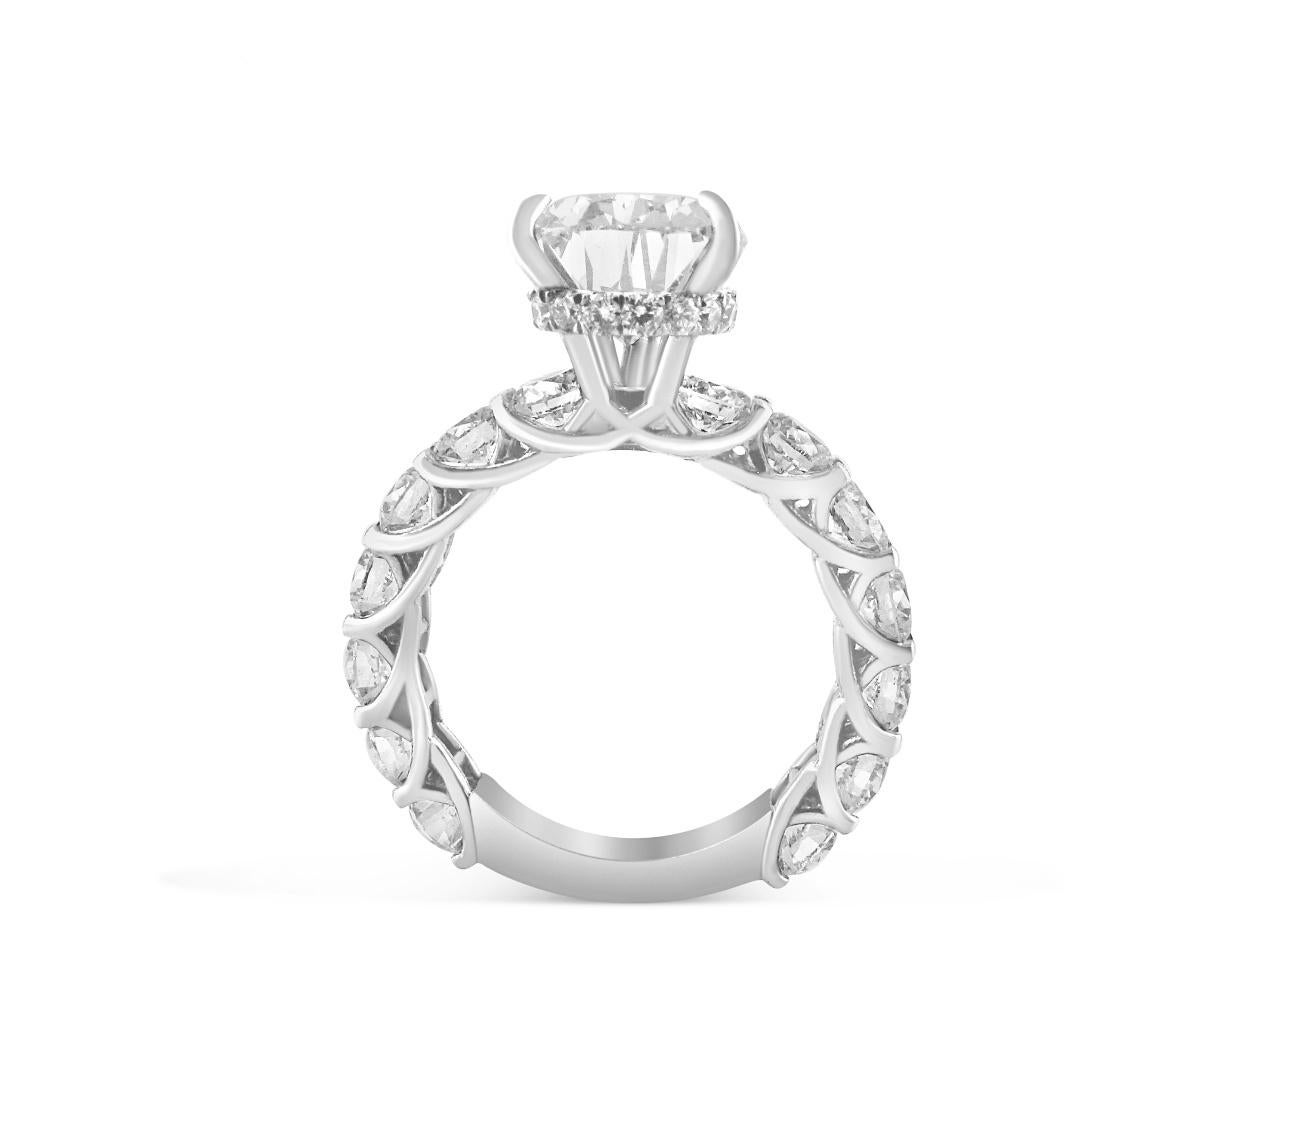 WHITE GOLD PEAR CUT DIAMOND RING WITH SIDE STONES - 6.65 CT


Set in 18K White gold


Total pear cut diamond weight: 3.66 ct
[ 1 diamond ]
Color: G
Clarity: VVS2

Total round white diamond weight: 2.69 ct
[ 14 diamonds ]
Color: G
Clarity: VS

Total